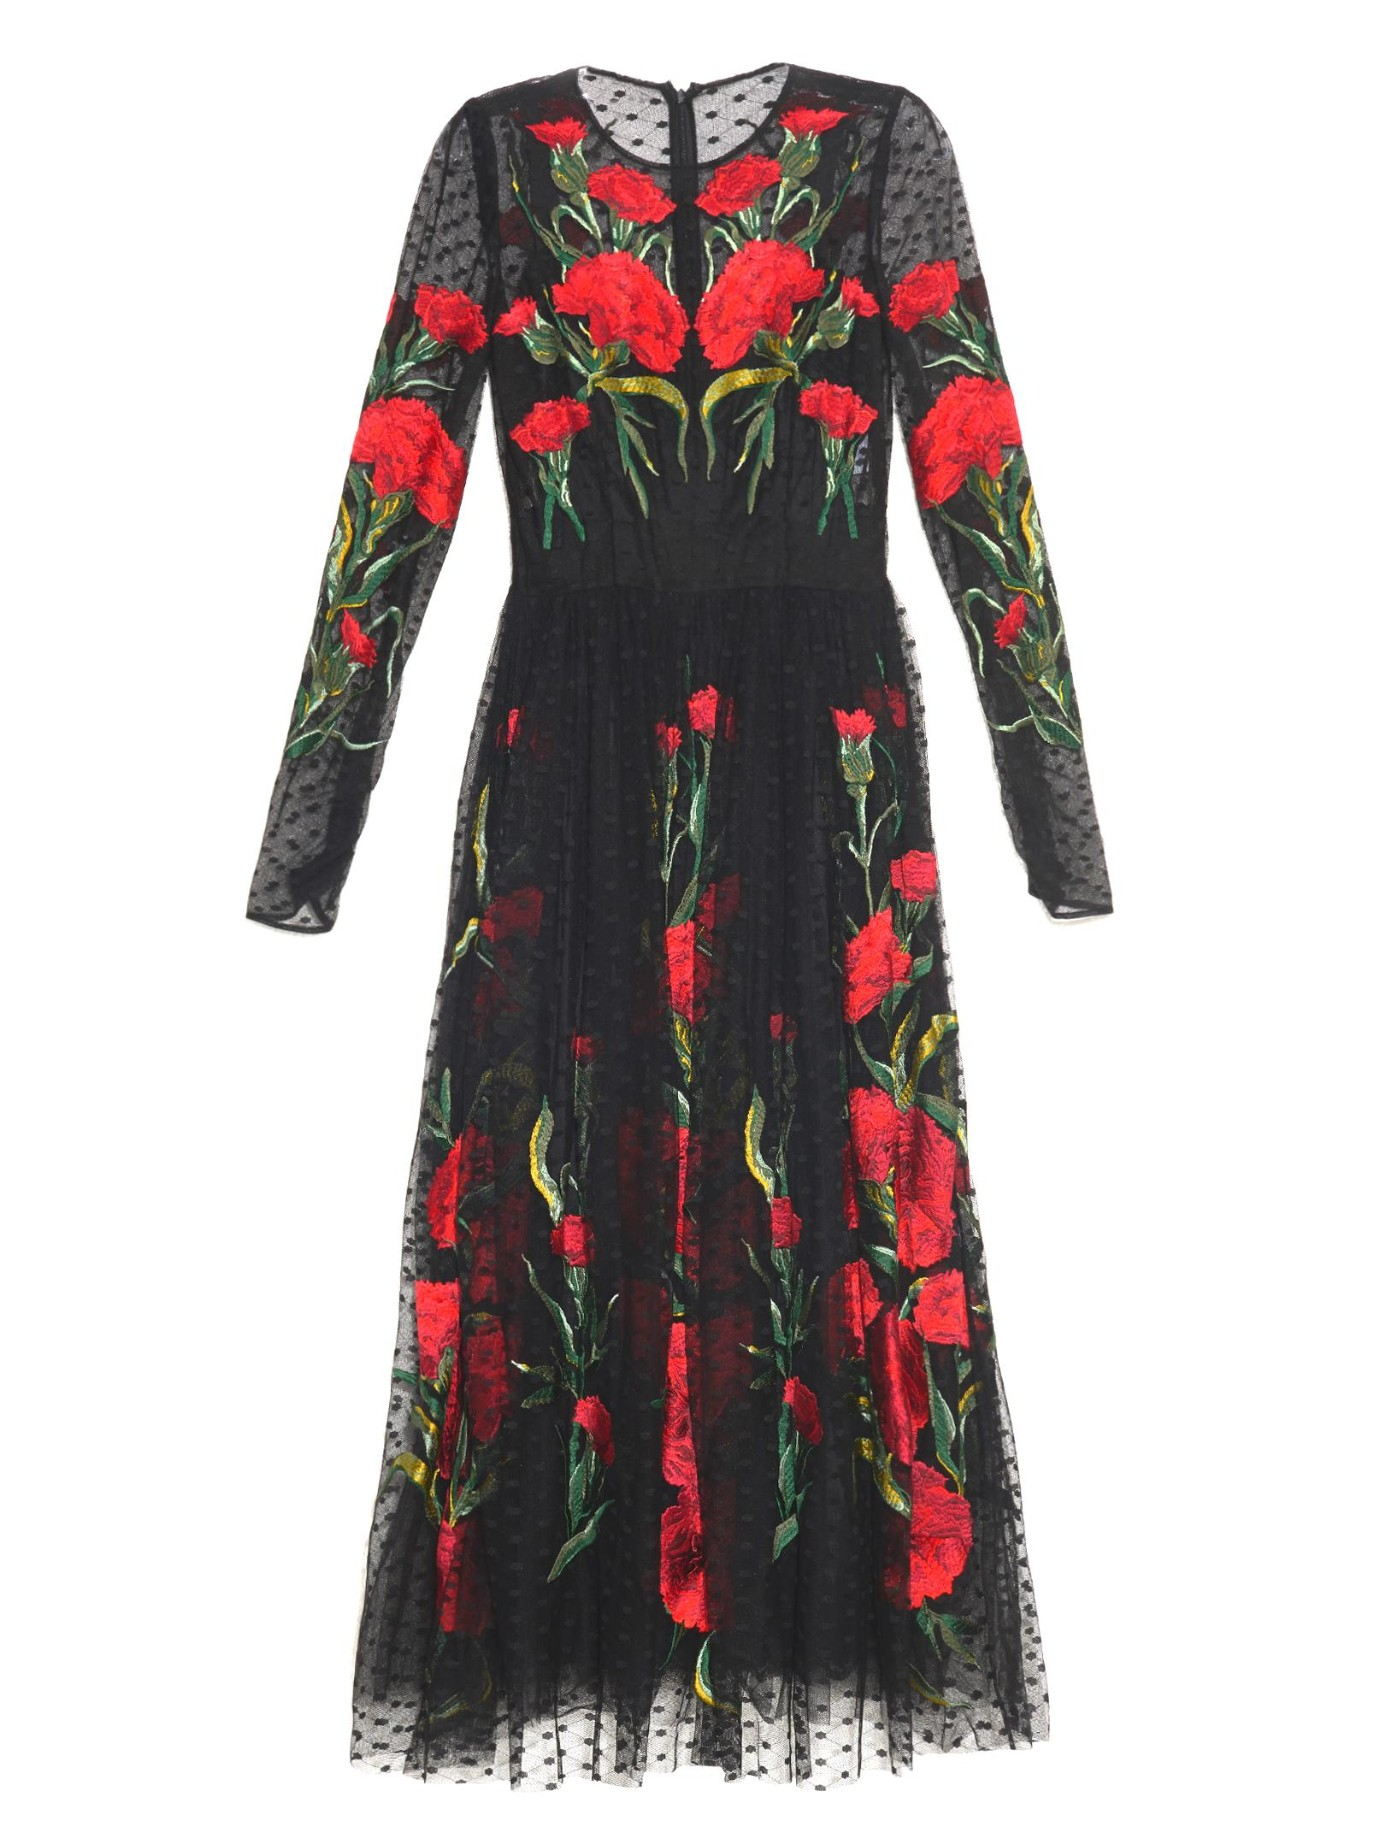 Dolce & gabbana Carnation-Embroidered Tulle Dress in Black | Lyst